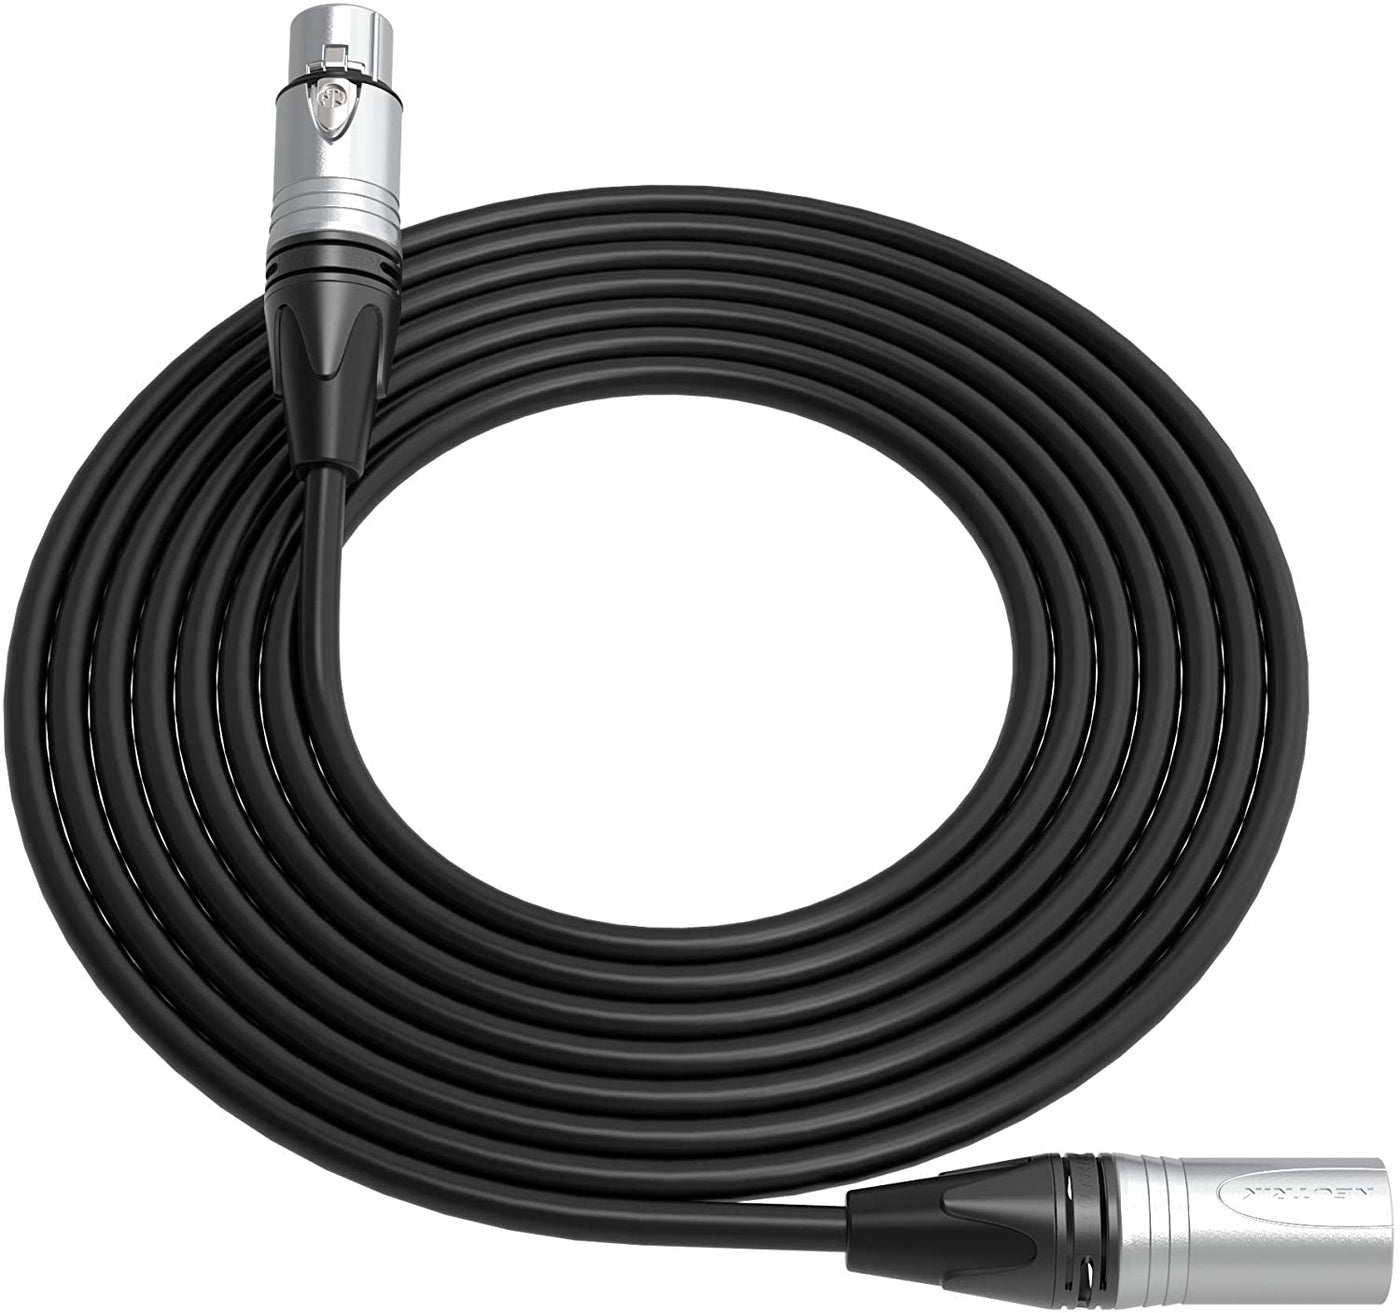 XLR Microphone Cable - Handwired - 100 Year Warranty